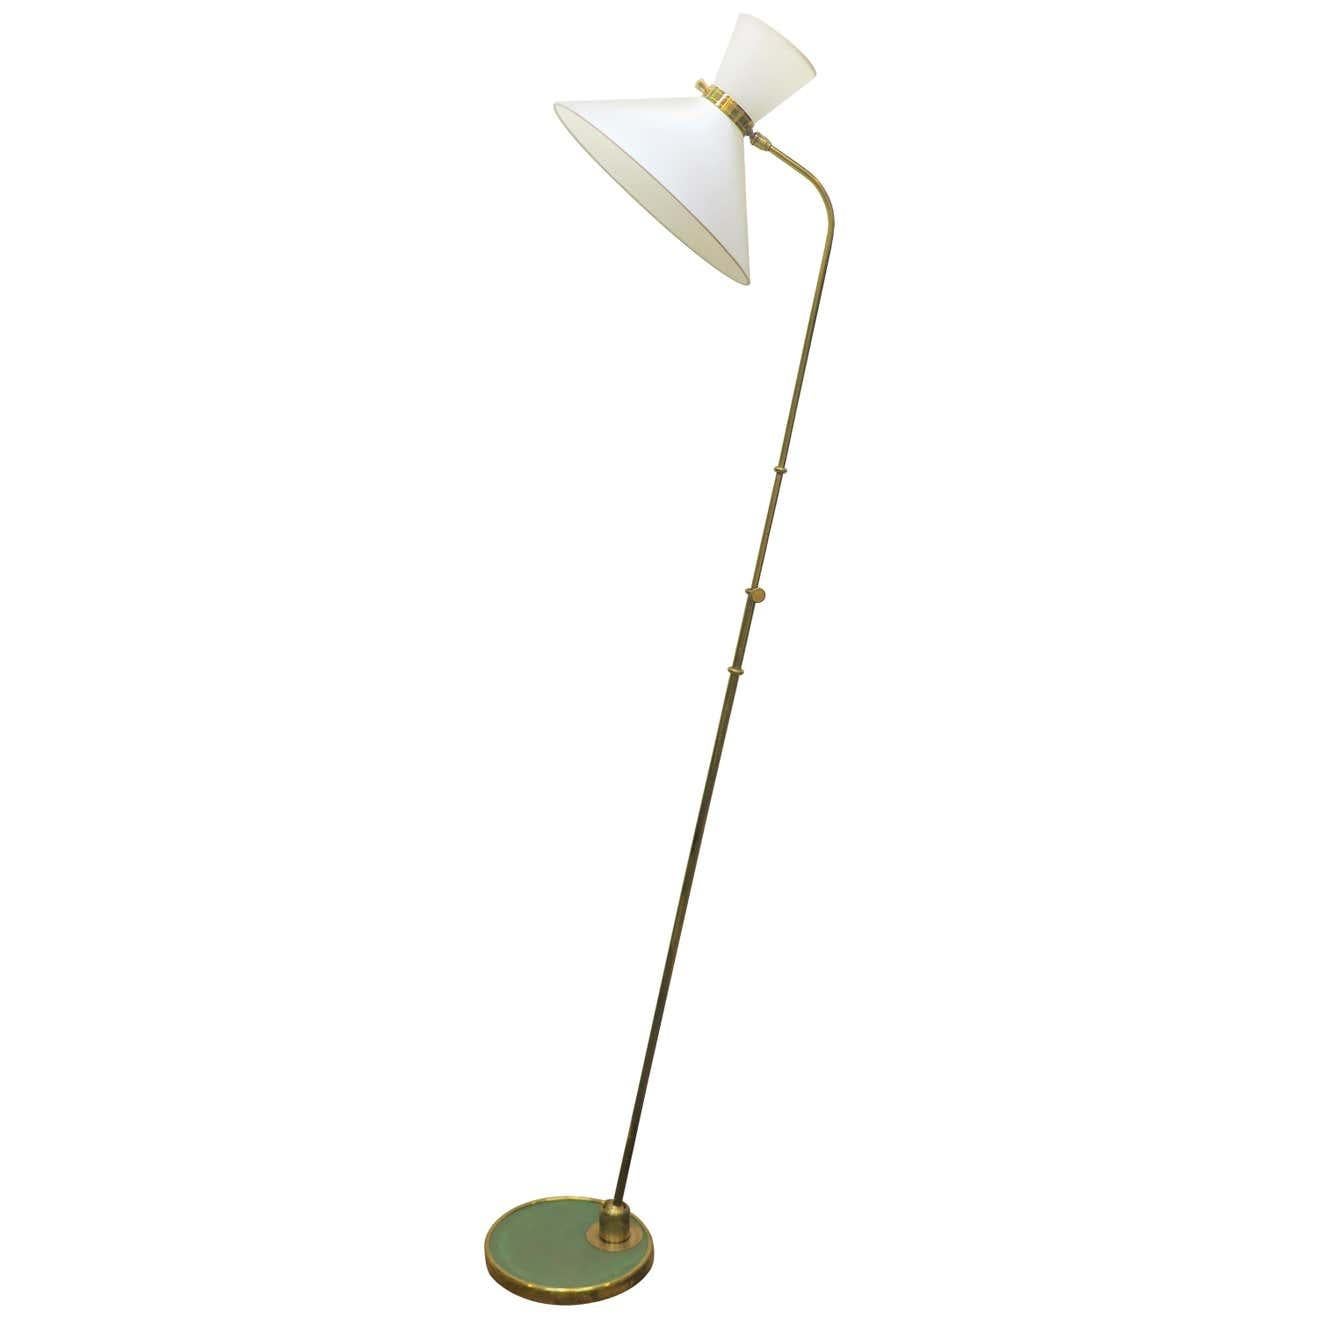 Two Lunel lamps offered together. This is a customized listing specific for order purposes only.
Lamp A French midcentury articulating brass floor lamp diablo by Maison Lunel. Fully adjustable rotation in 360 degrees with height adjustment from 64